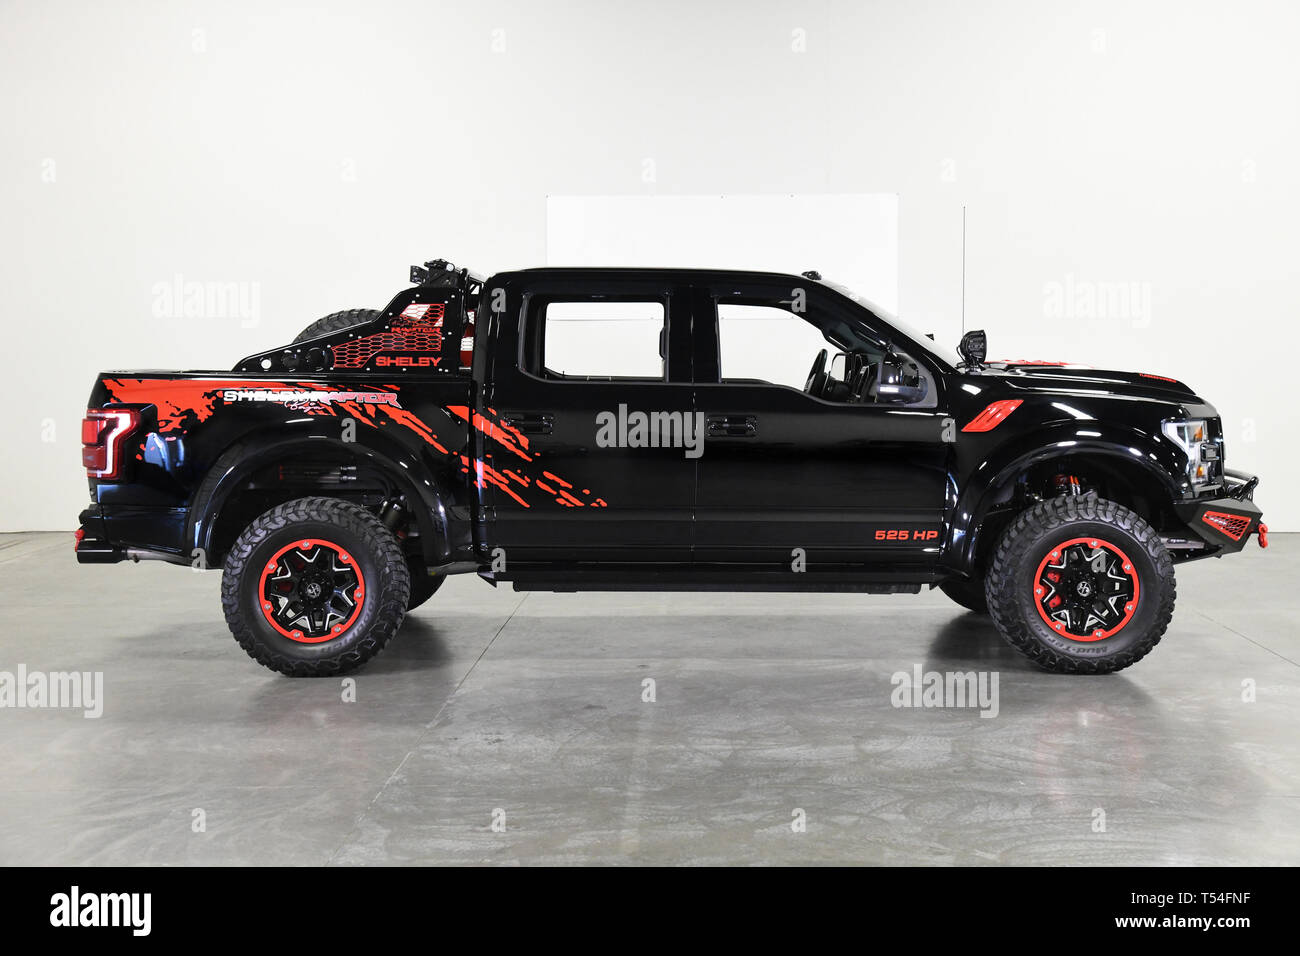 April 20, 2019: 2018 Ford F-150 SHELBY Raptor Baja 525HP Turbo FOX 3 2018 SHELBY BAHA RAPTOR! WE HAVE 7 PAGES OF ADDED SHELBY AND UPGRADE OPTIONS! CALL FOR A COPY. SONNY @ 972-523-9797 SHELBY BAJA RAPTOR $117460 ADDITIONAL INSTALLED UPGRADES $15357 FULL FORD AND SHELBY WARRANTY ONE OWNER CERTIFIED BAJA OPTION GROUP 525 HP 610 FPT PERFORMANCE UPGRADE OPTION LIST TO ECOBOOST TURBO SHELBY TUNED PERFORMANCE EXHAUST DUAL INTAKE BAJA HOOD FOX 3 RAPTOR STAGE 2 SHOCK SYSTEM 18'' BAJA WHEELS BFG MUDS 35/12.50/18 WITH TWO FULL SPARES XL POWER STEPS FRONT AND REAR SHELBY BUMPERS LED LED LED'S 40'' CUR Stock Photo